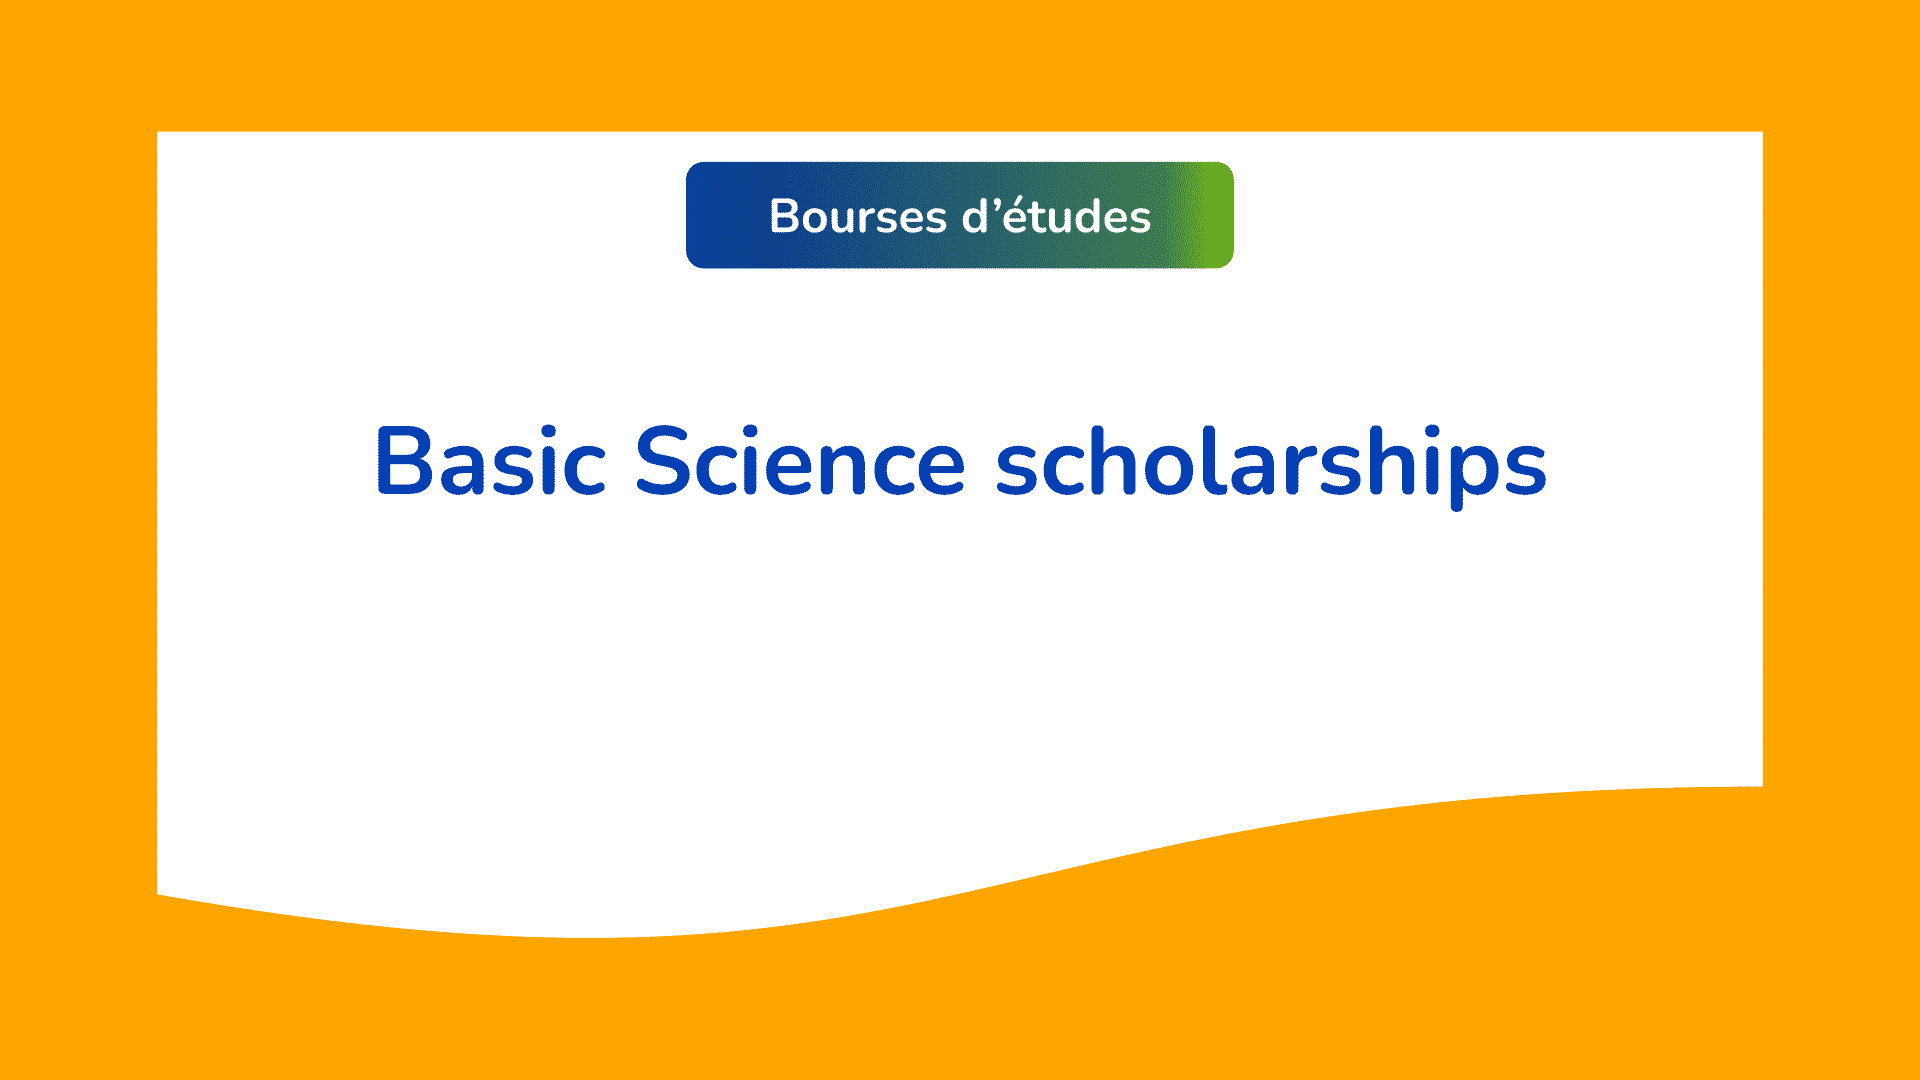 88 Basic Science scholarships available in 20232024